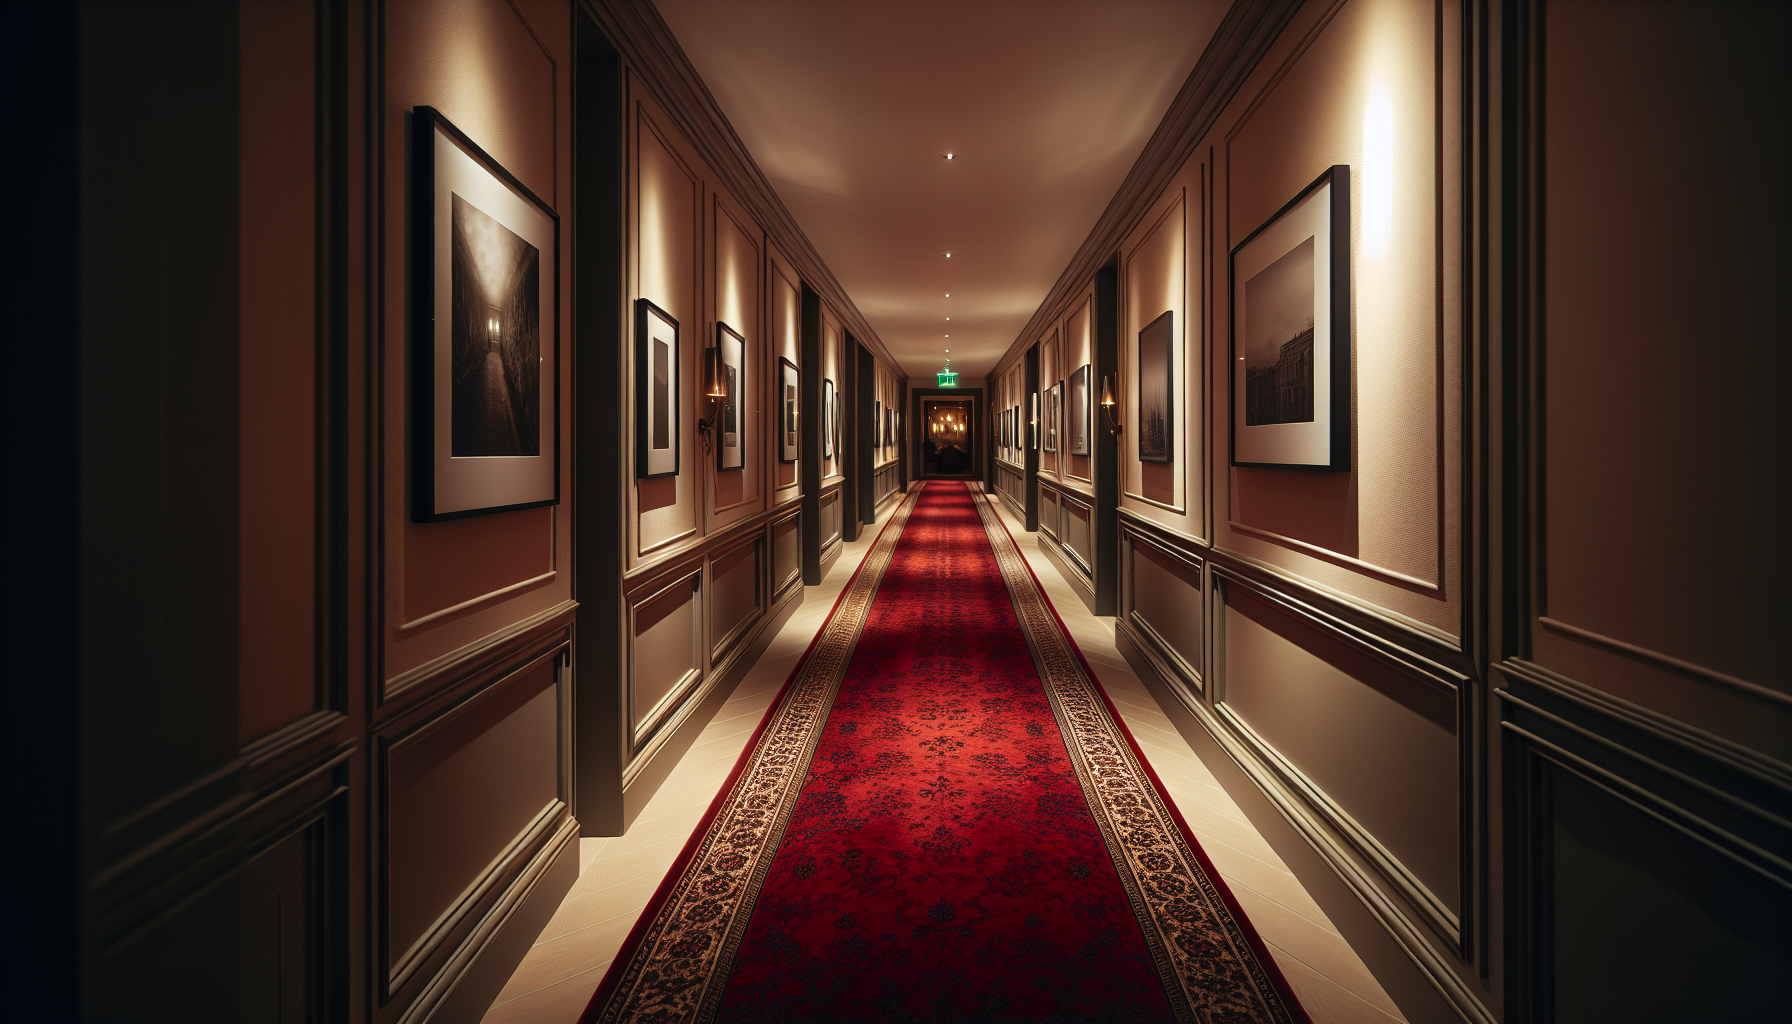 Hallway with a welcoming corridor created by a runner rug